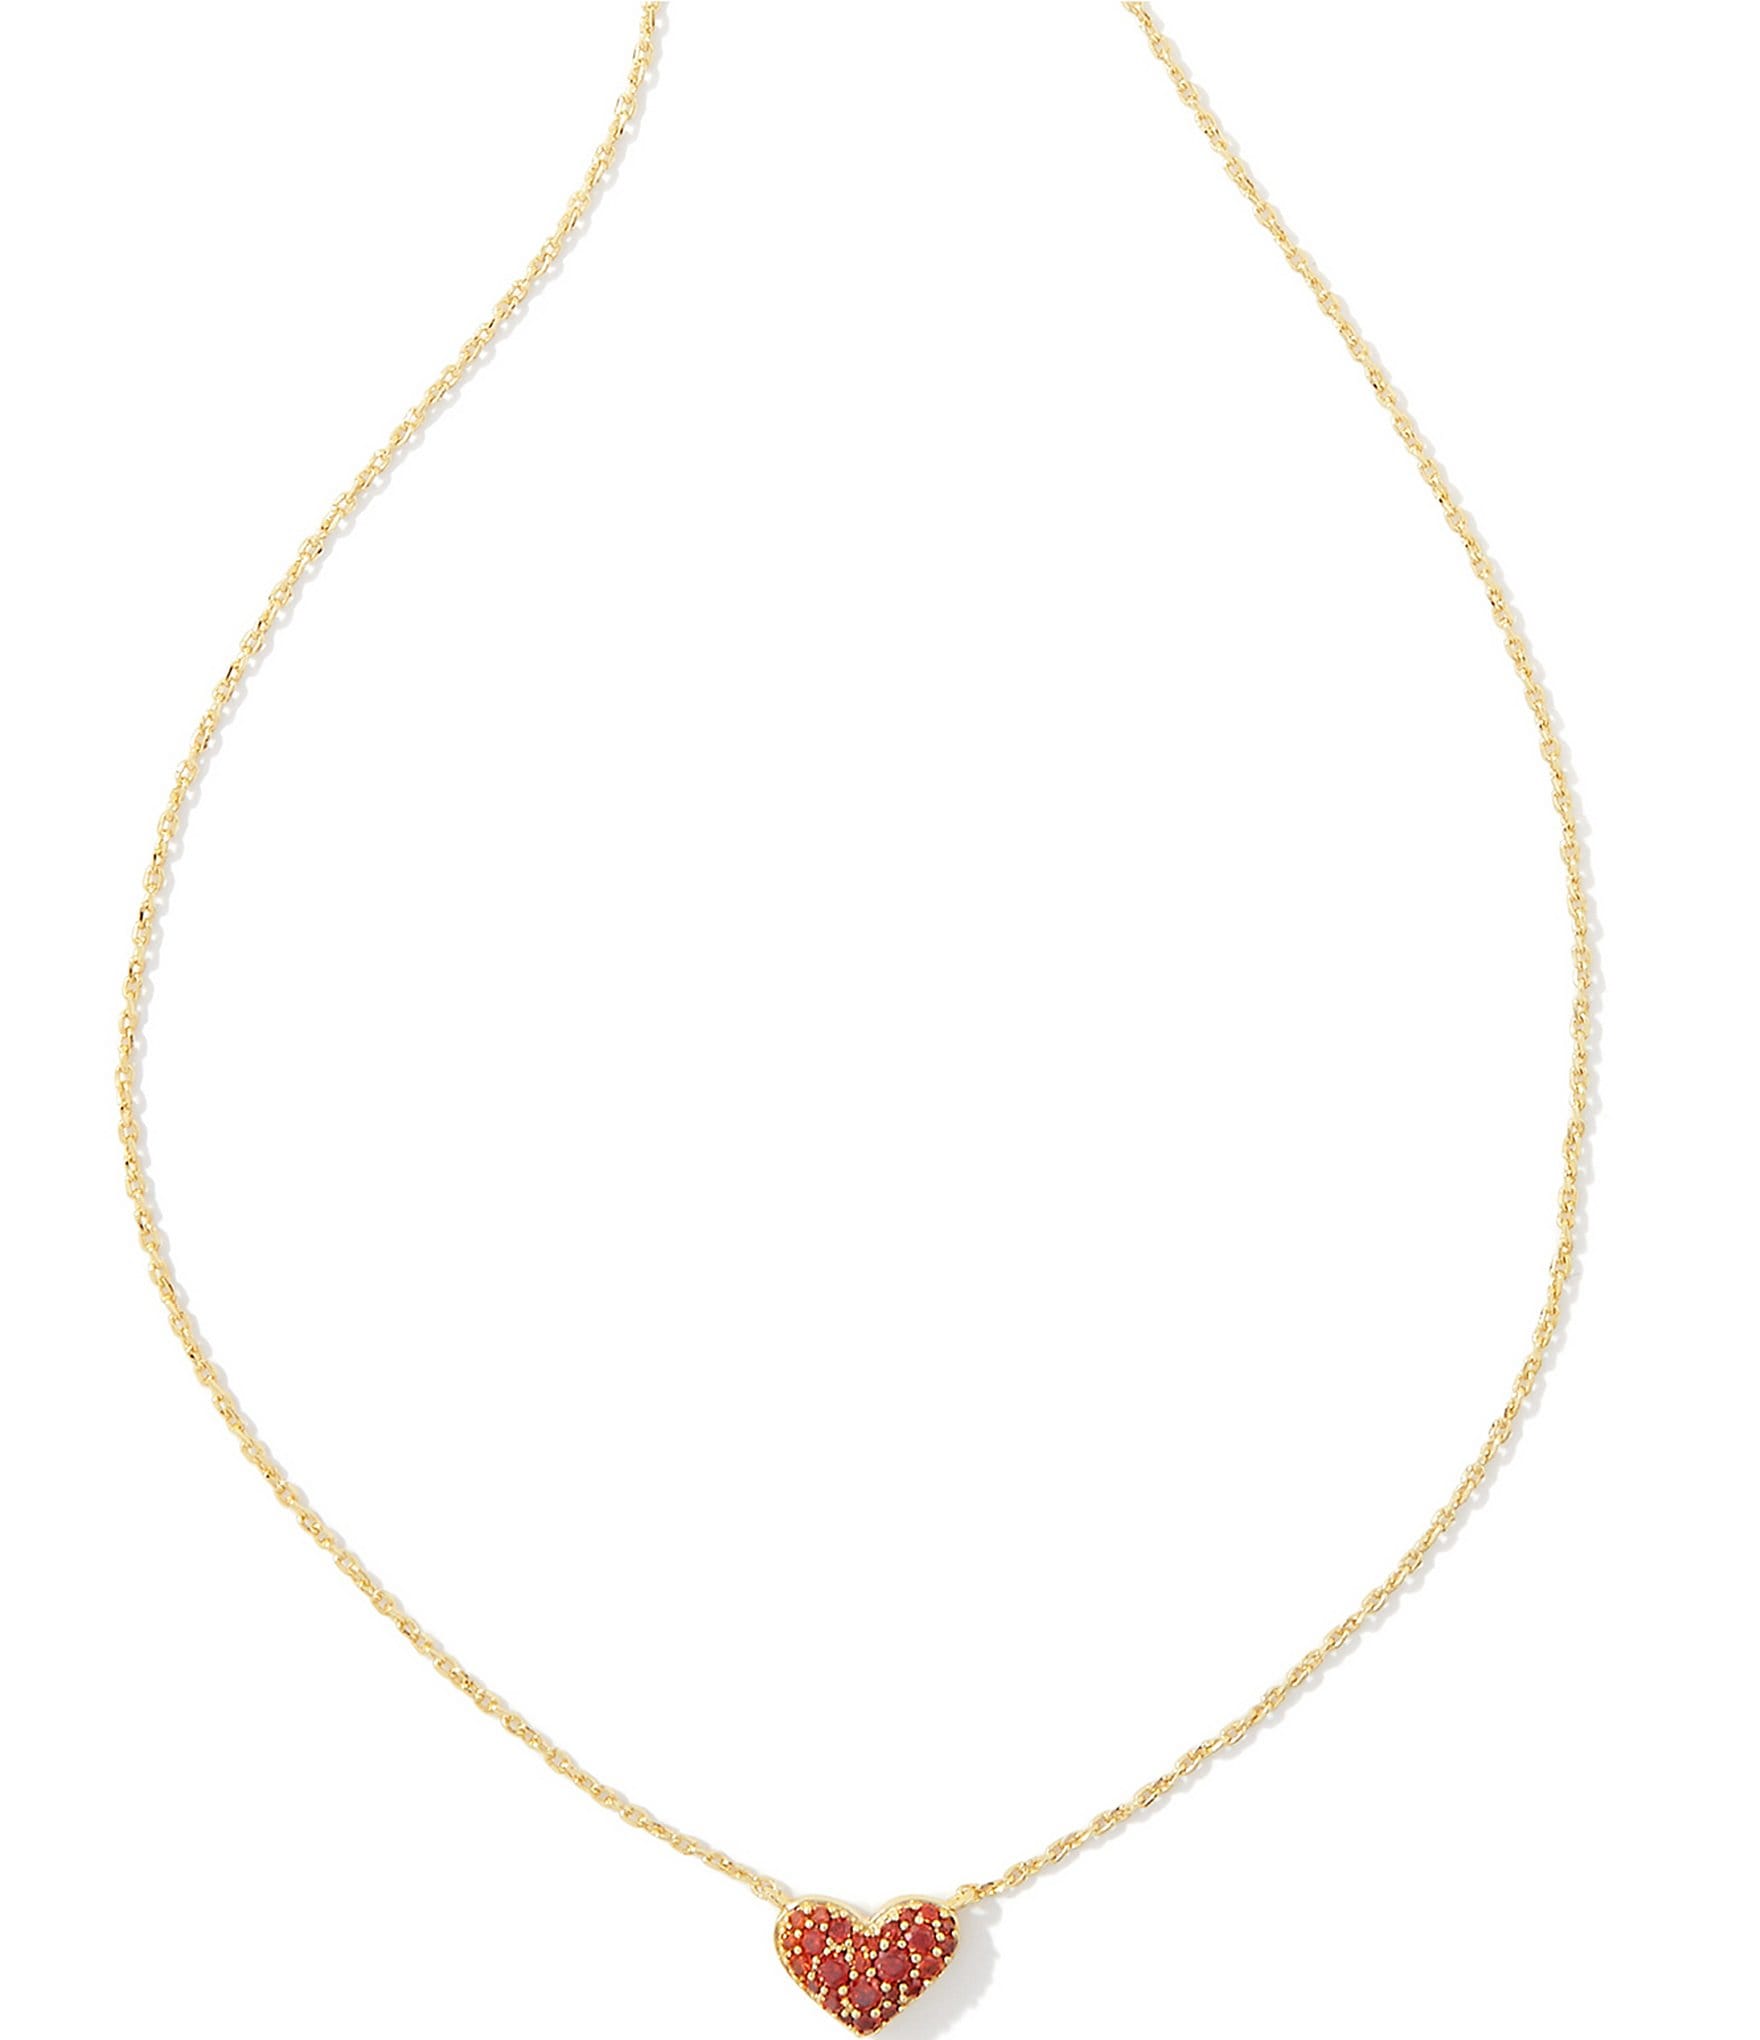 Elisa Gold Pendant Necklace in Ruby Red | Kendra Scott